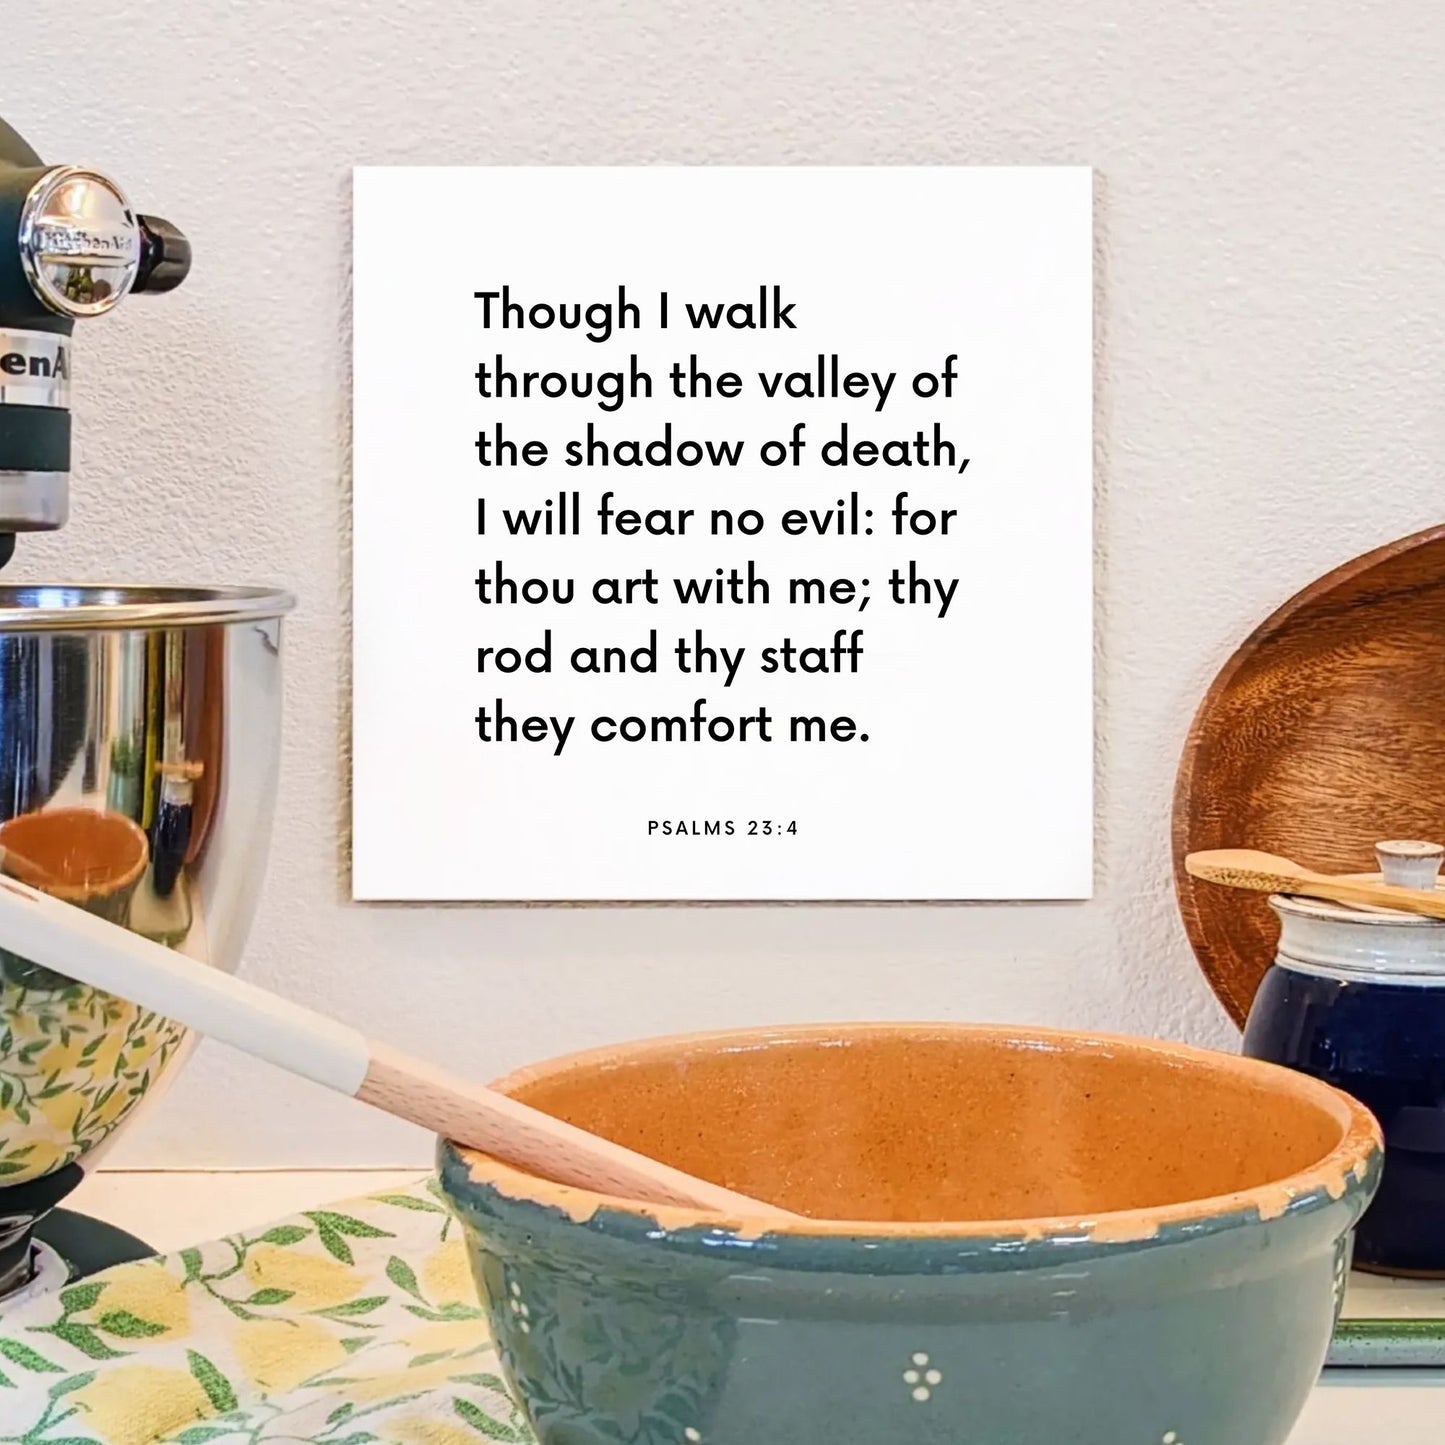 Kitchen mouting of the scripture tile for Psalms 23:4 - "Though I walk through the valley of the shadow of death"